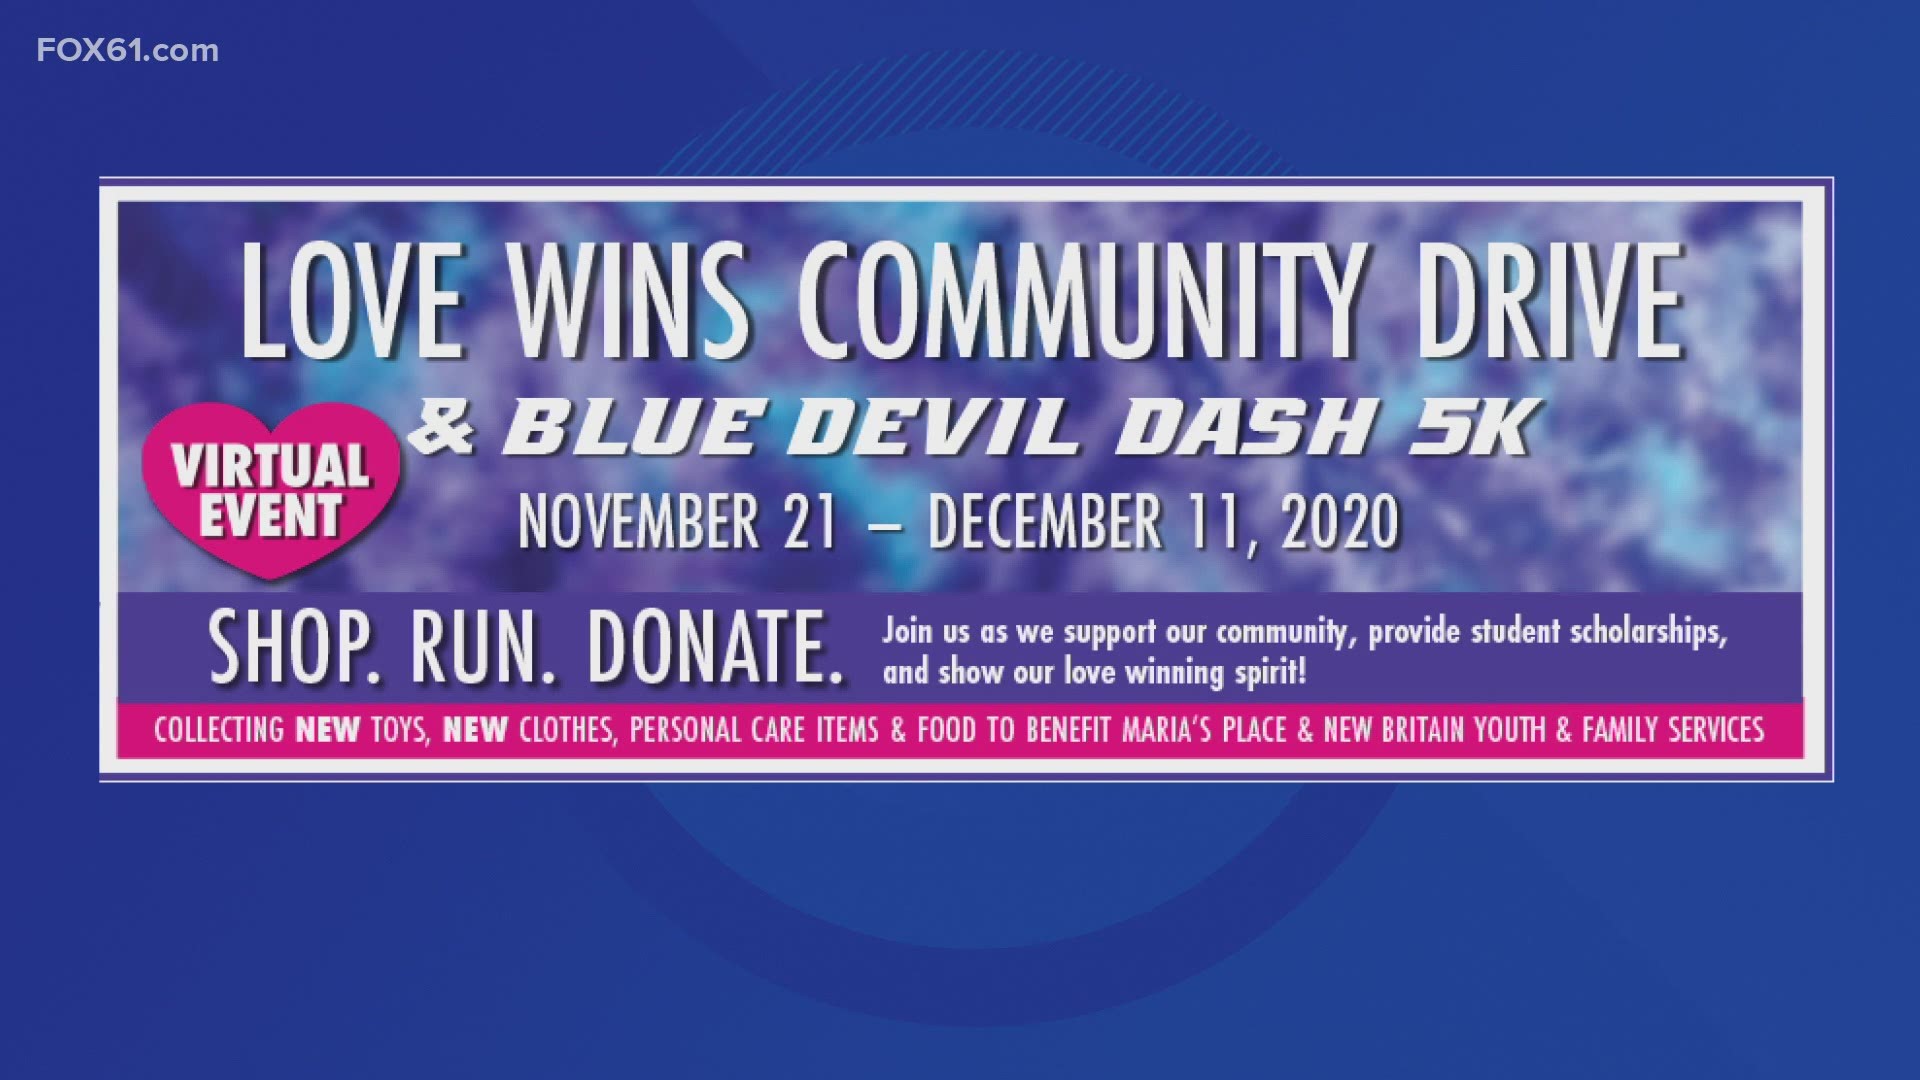 The community drive's goal is to help make a difference in the lives of individuals, children and families